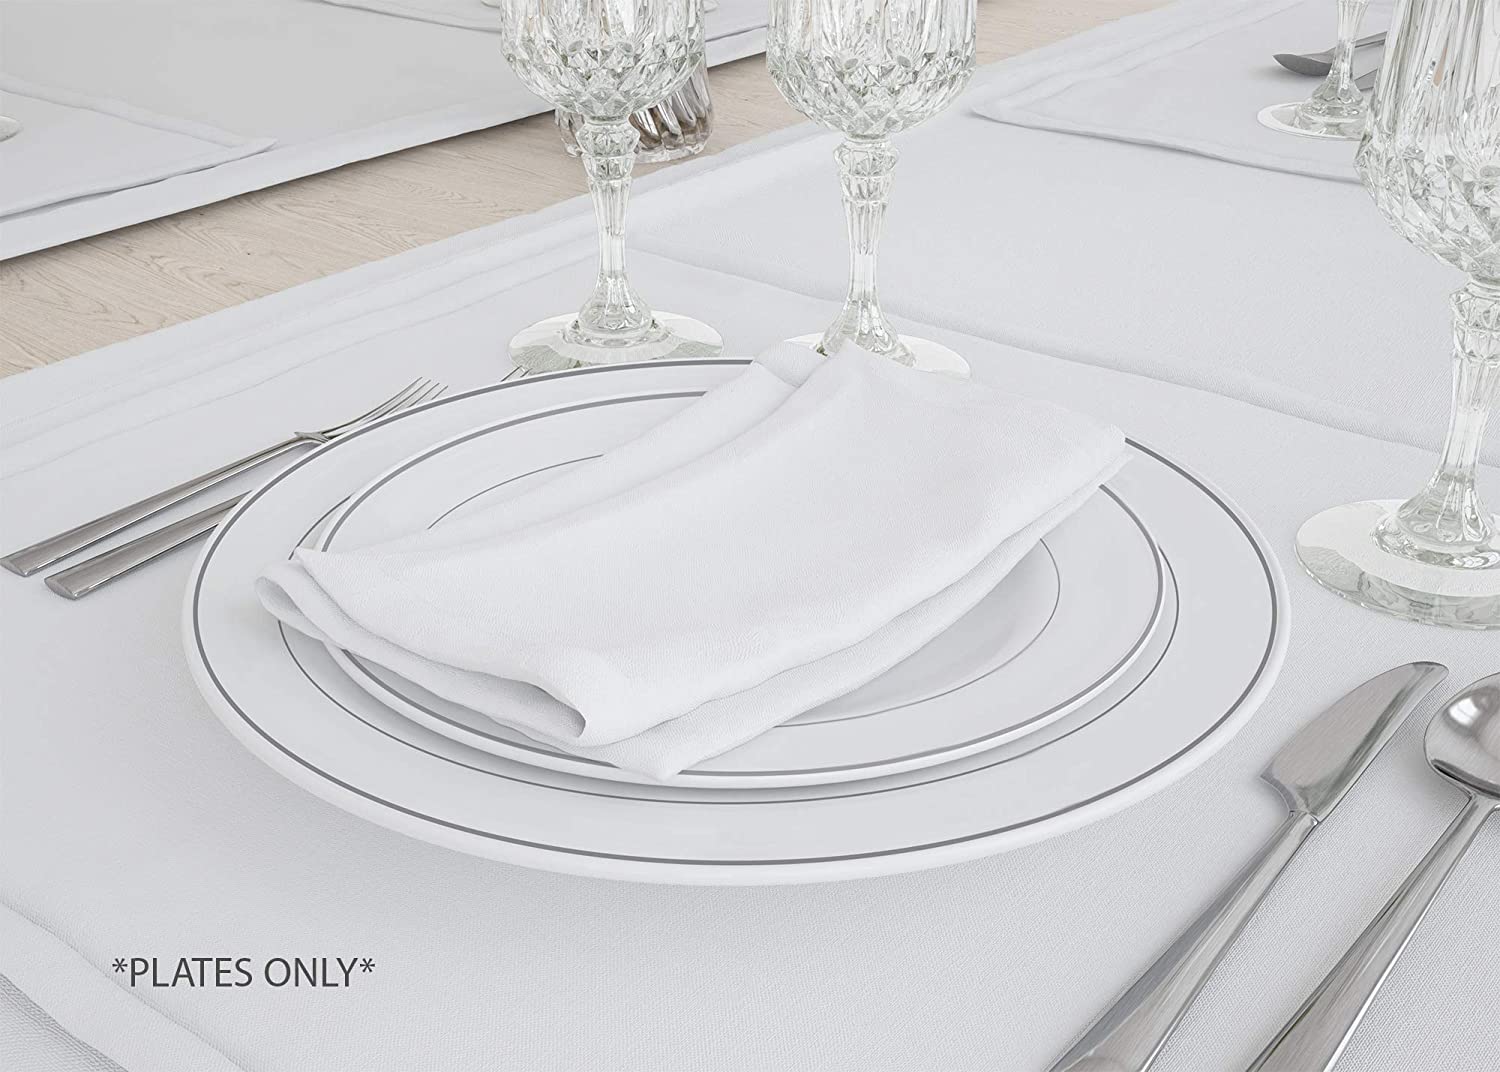 50 Disposable Plastic Plates, 25 - 10.25 inch and 25 - 7.5 inch White Plates with Silver Trim